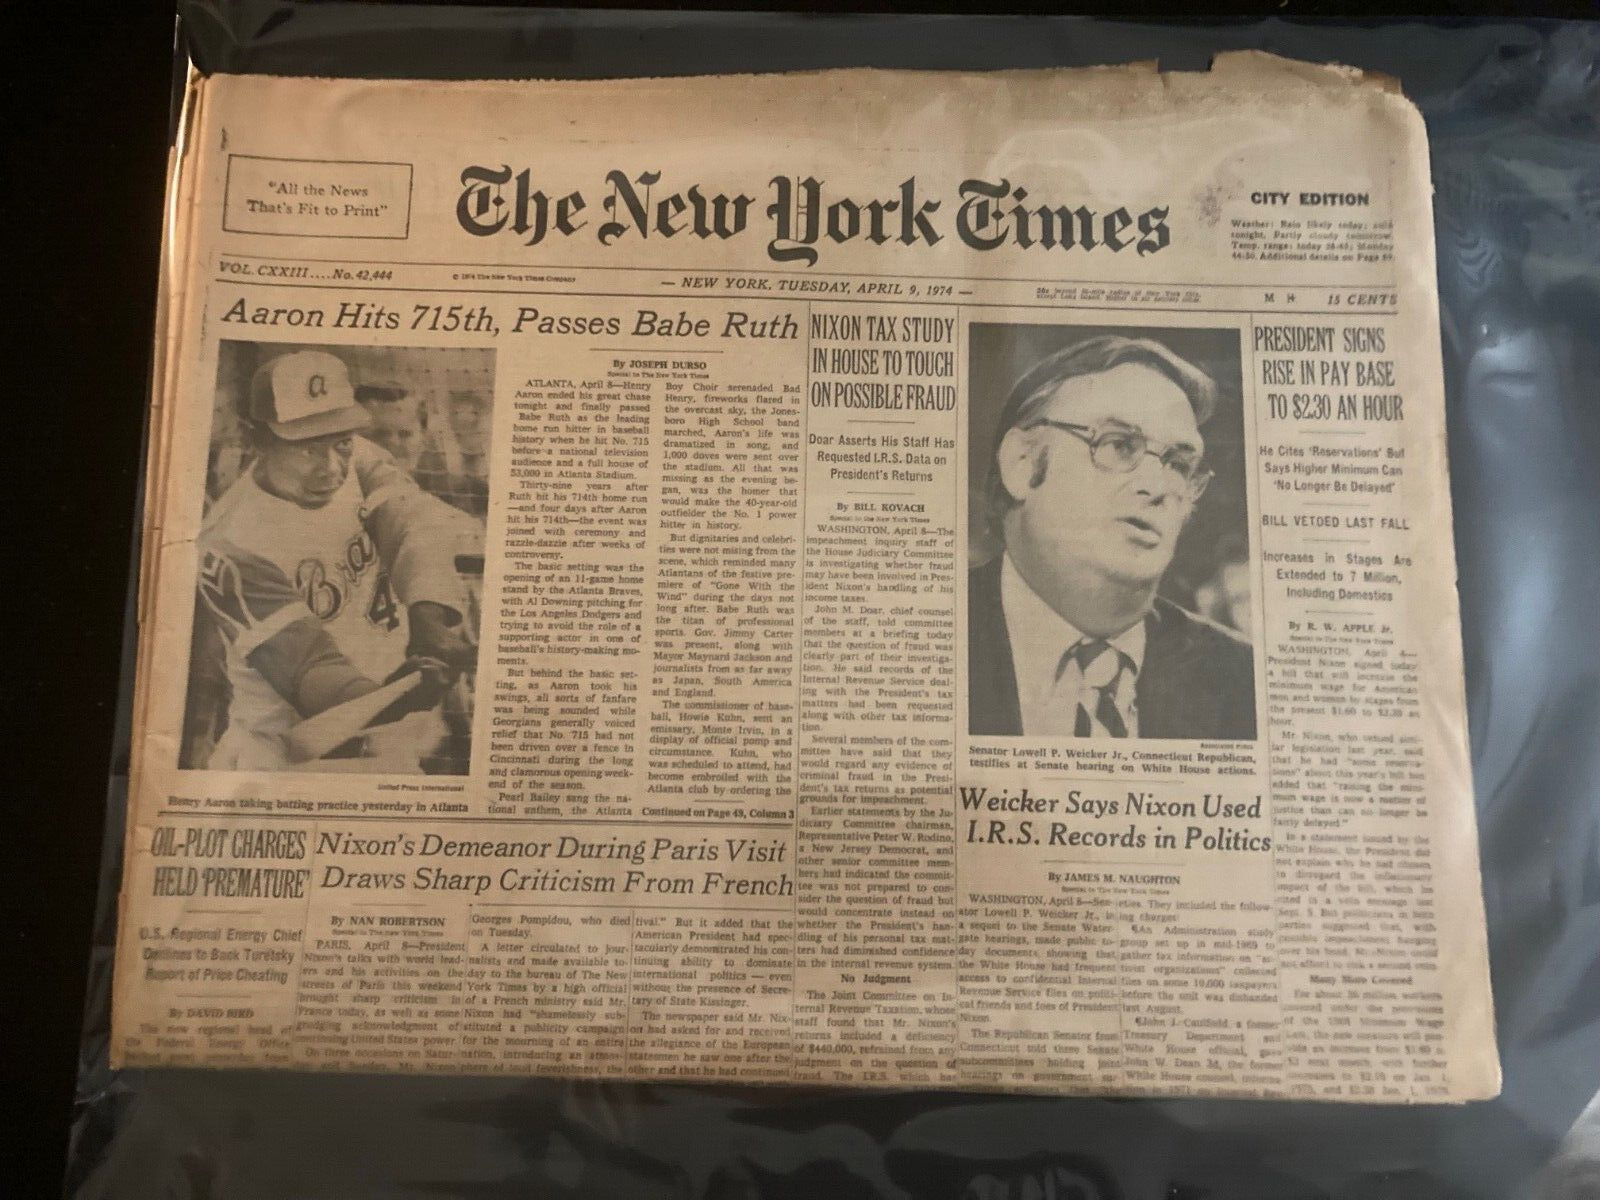 1974 APRIL9  NEW YORK Times NEWSPAPER - AARON HITS 715  passes Babe Ruth